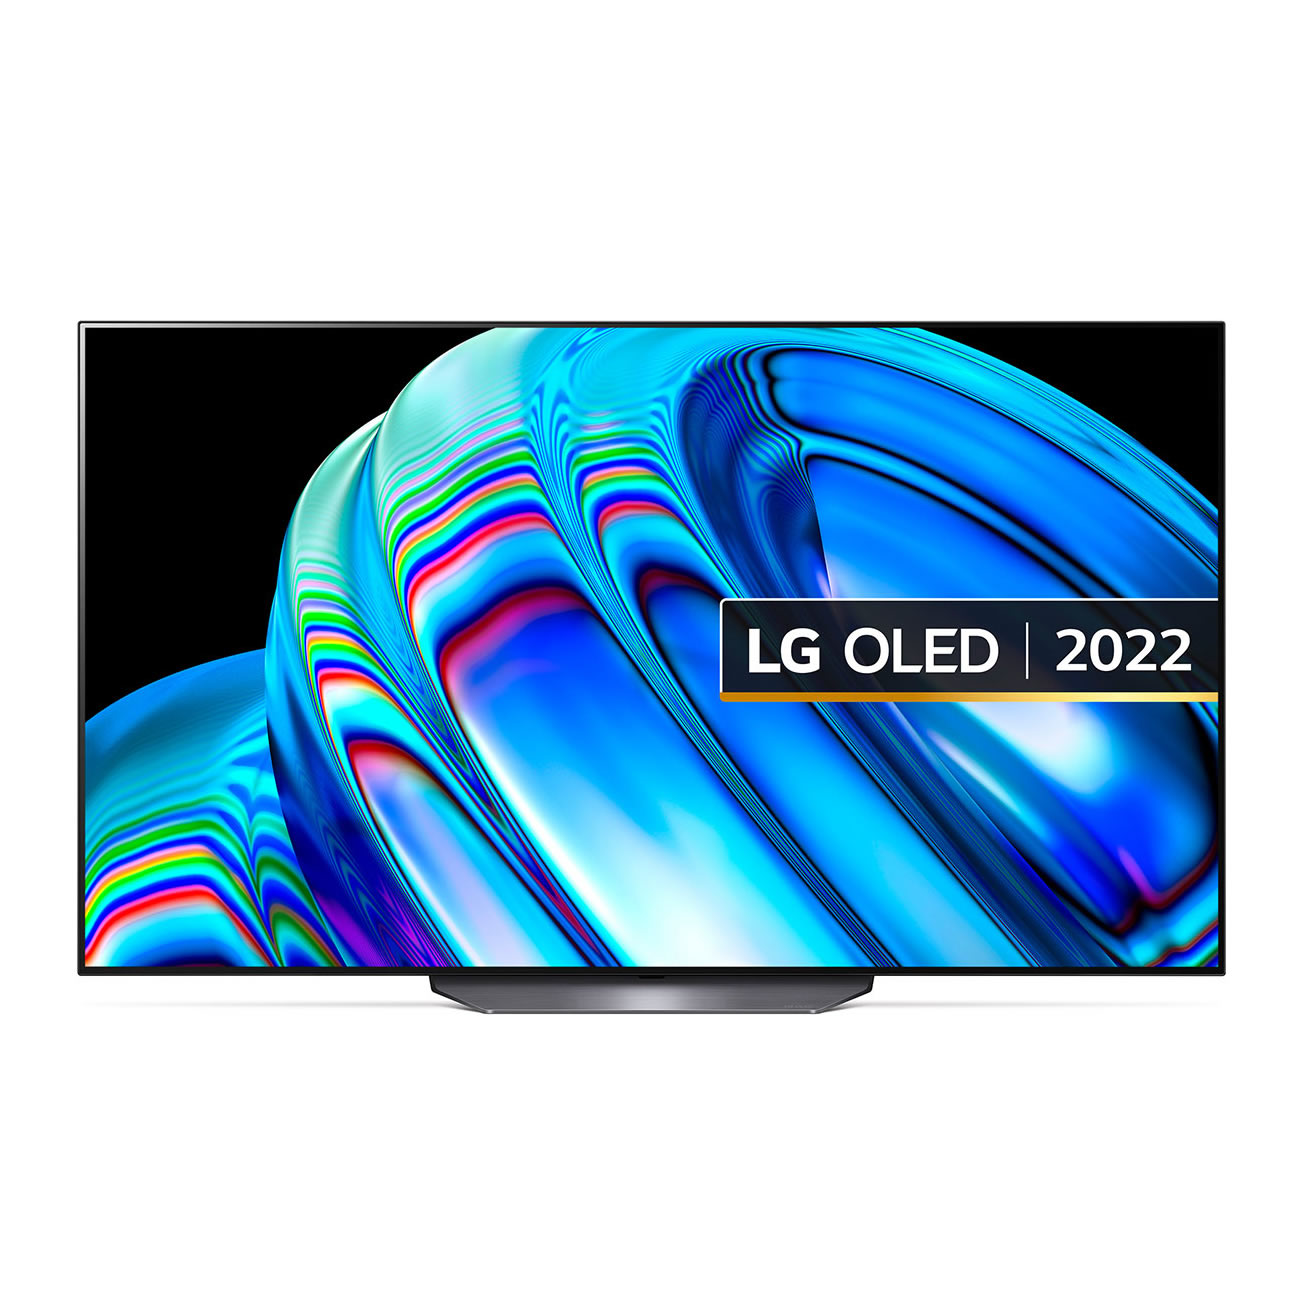 LG 77inch OLED HDR 4K UHD SMART TV WiFi Dolby Atmos